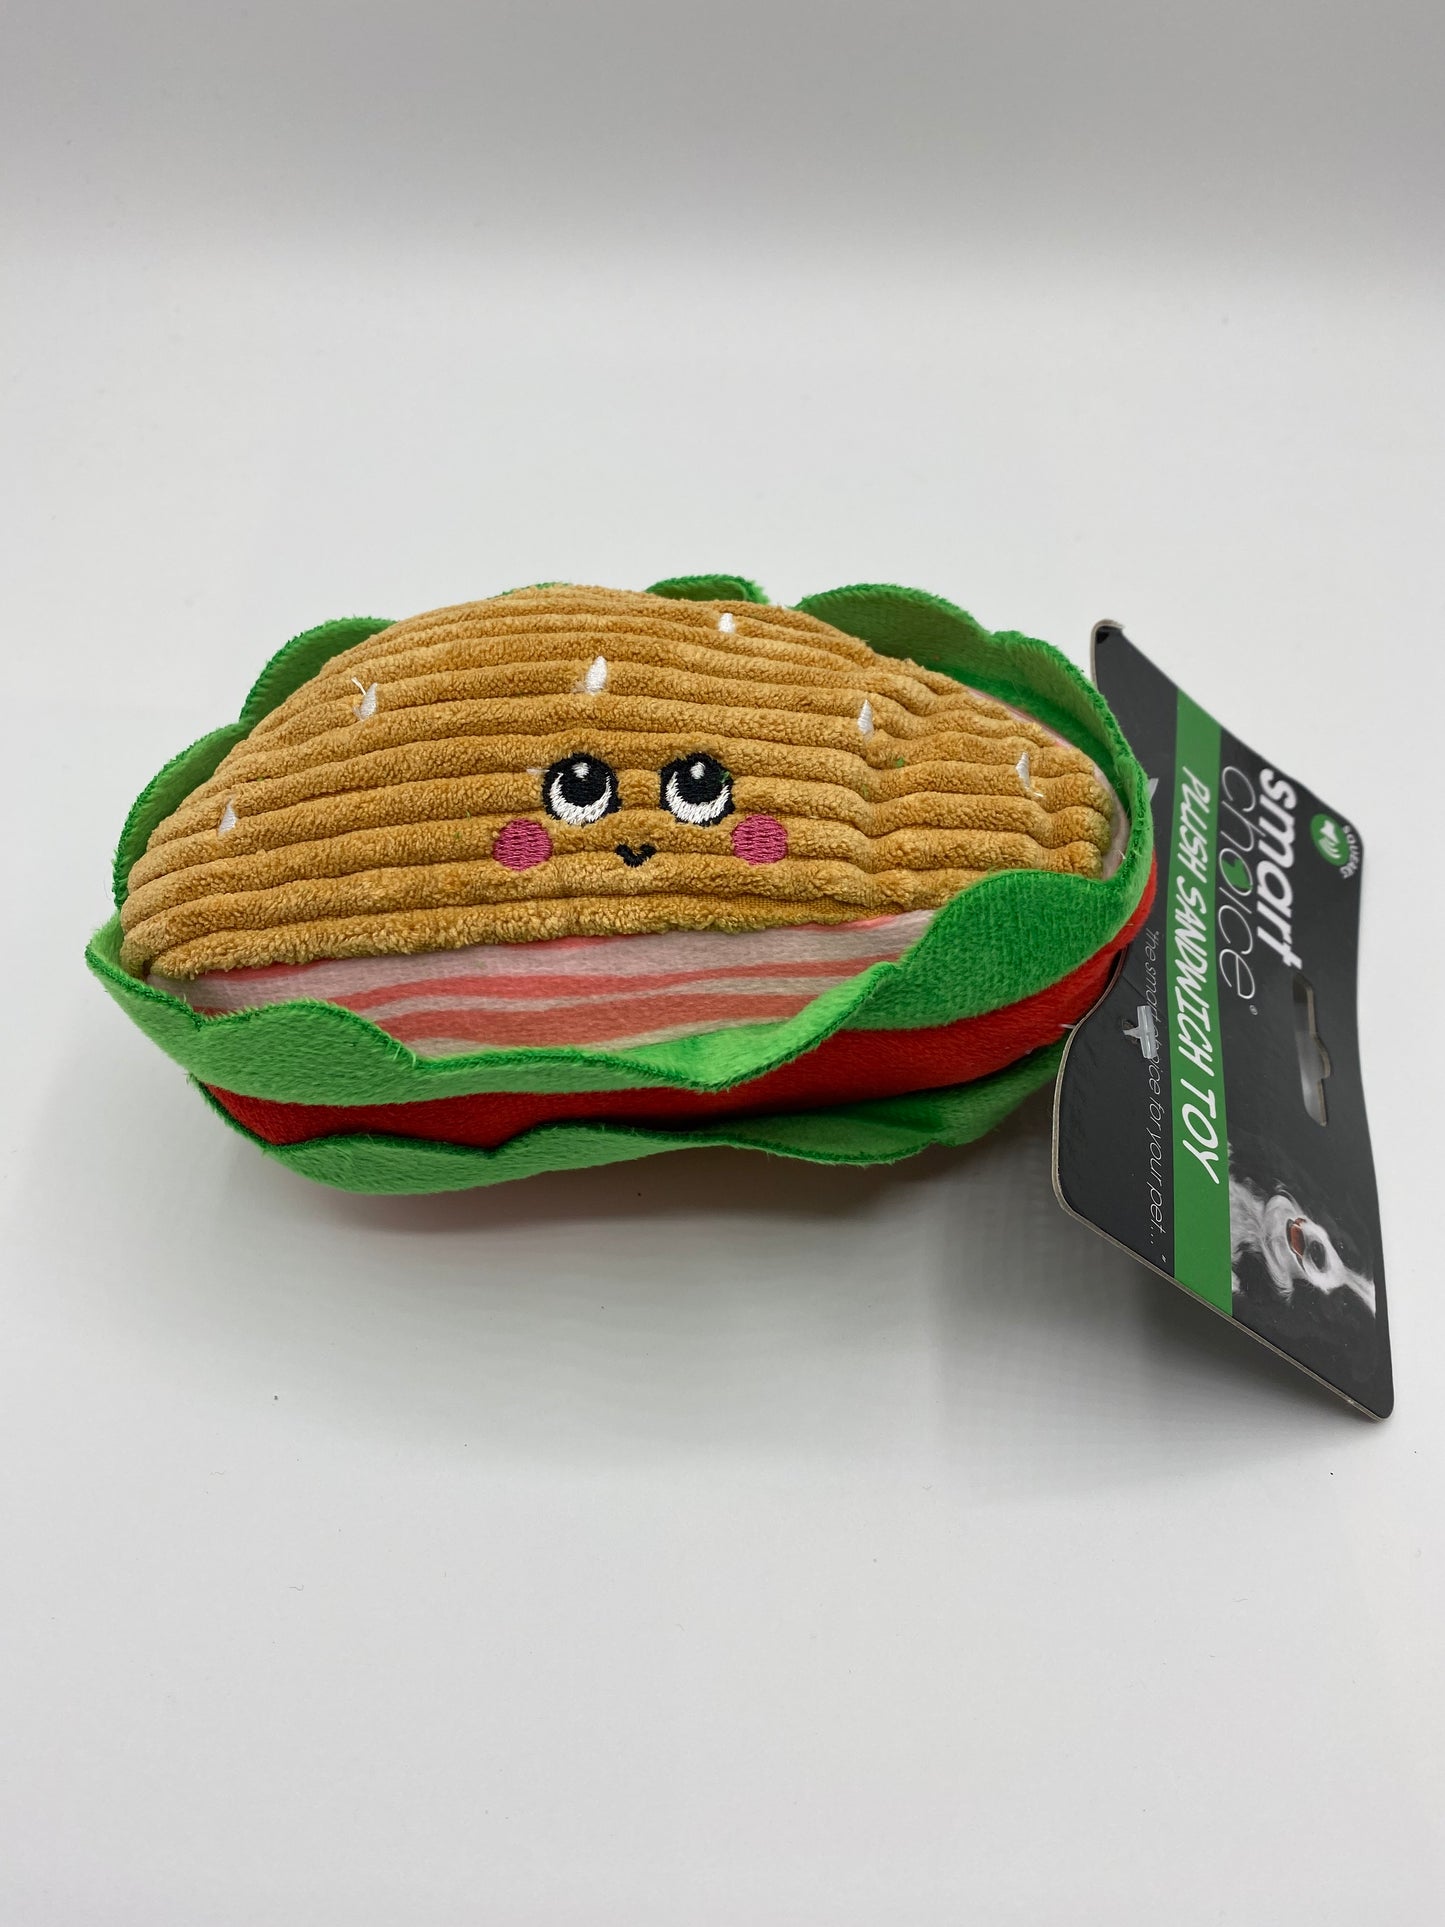 Plush Sandwich Dog Toy in Variouse Colours Size Approx 16cm Long